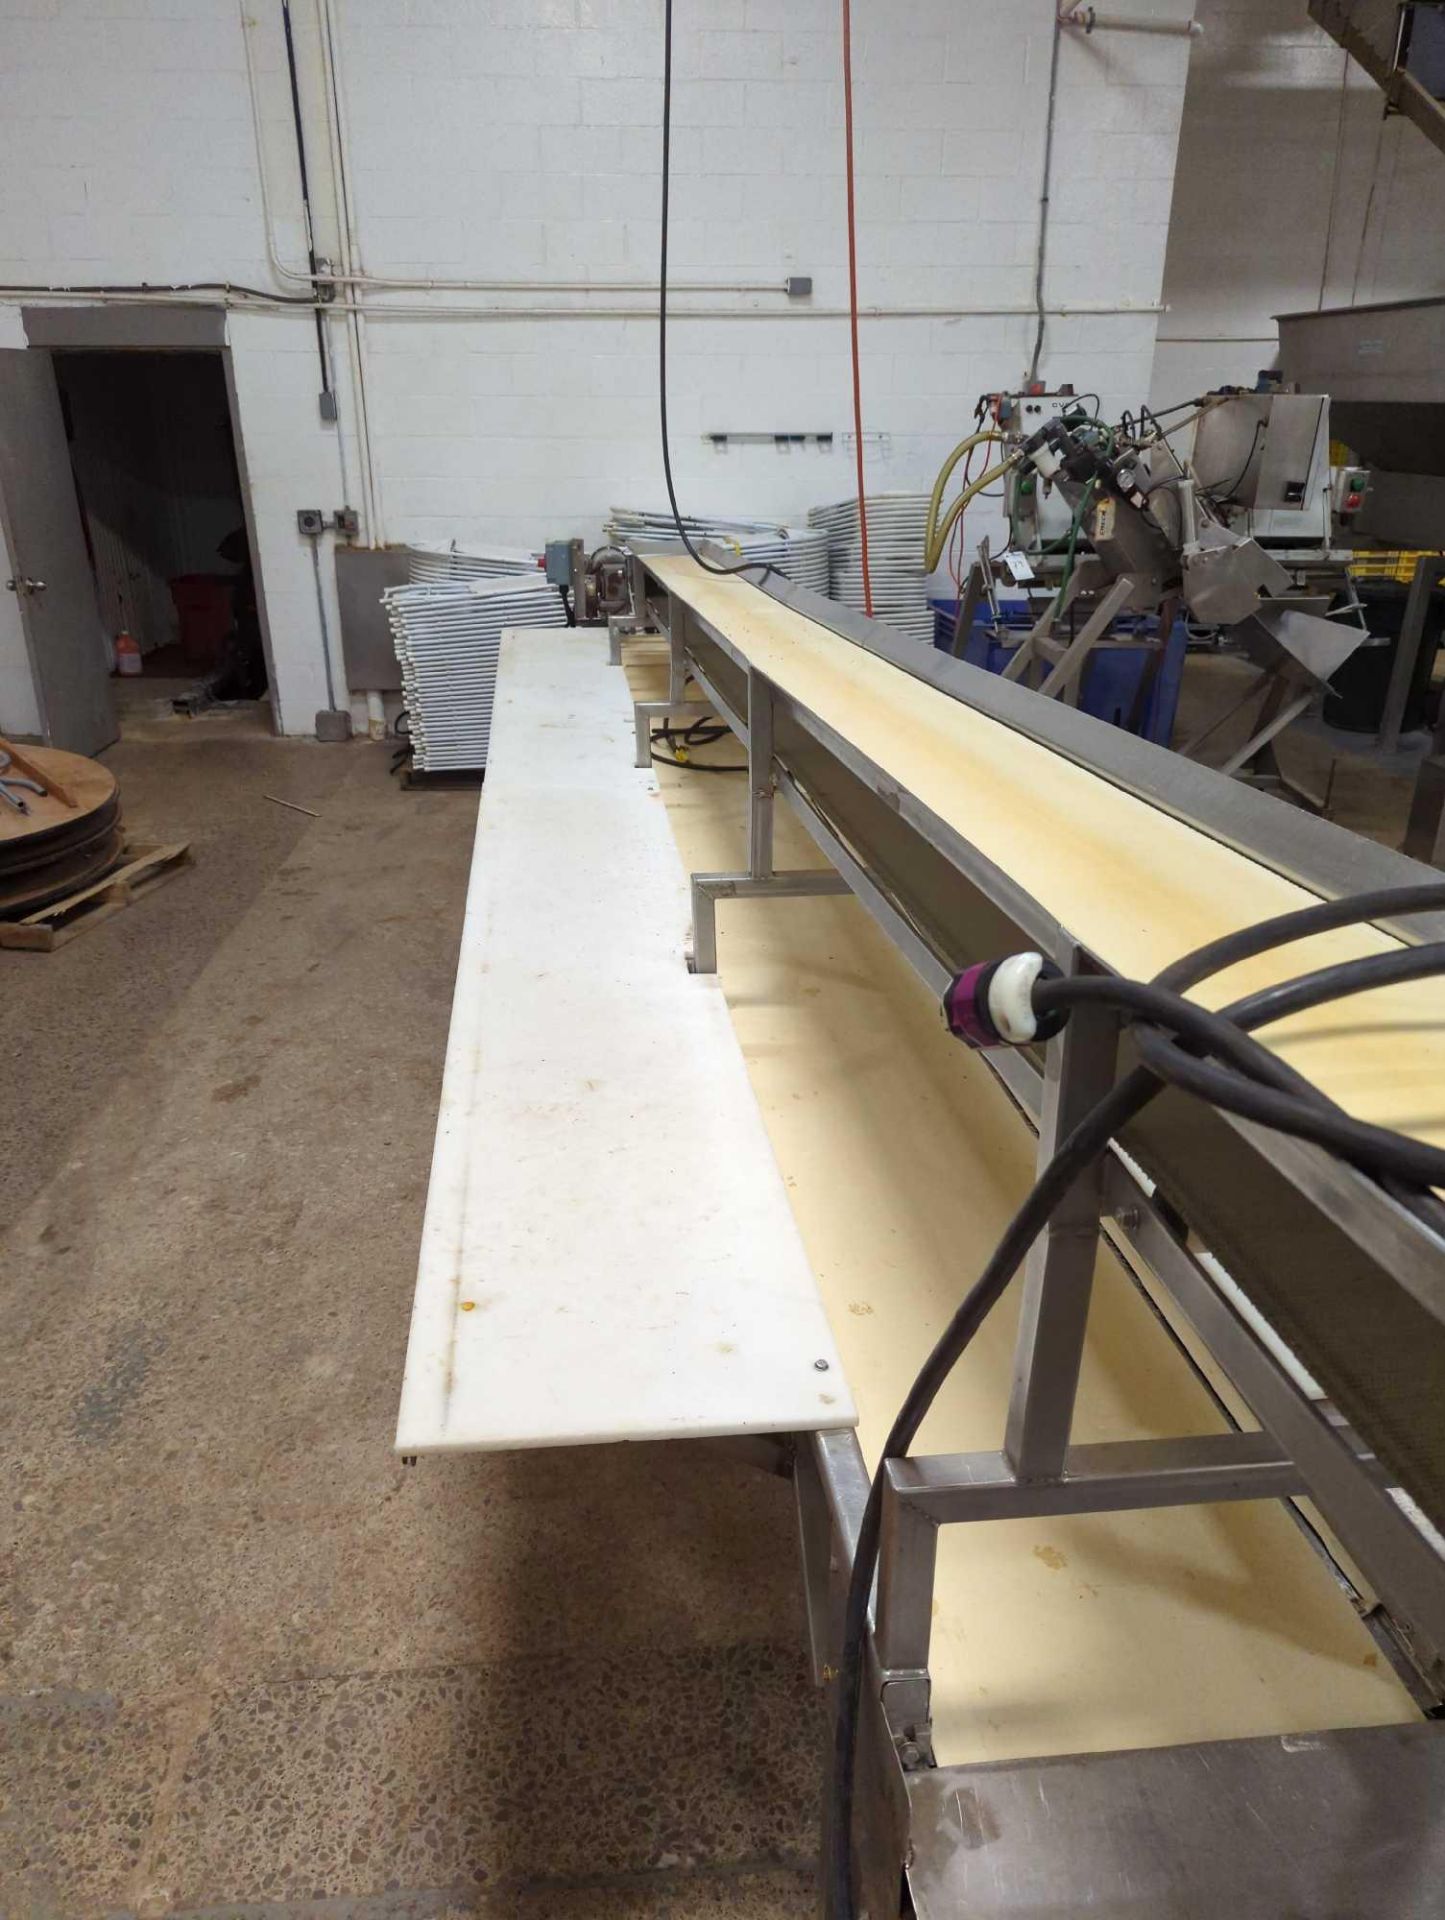 Inspection Belt Conveyors With Cutting Boards - Image 5 of 12